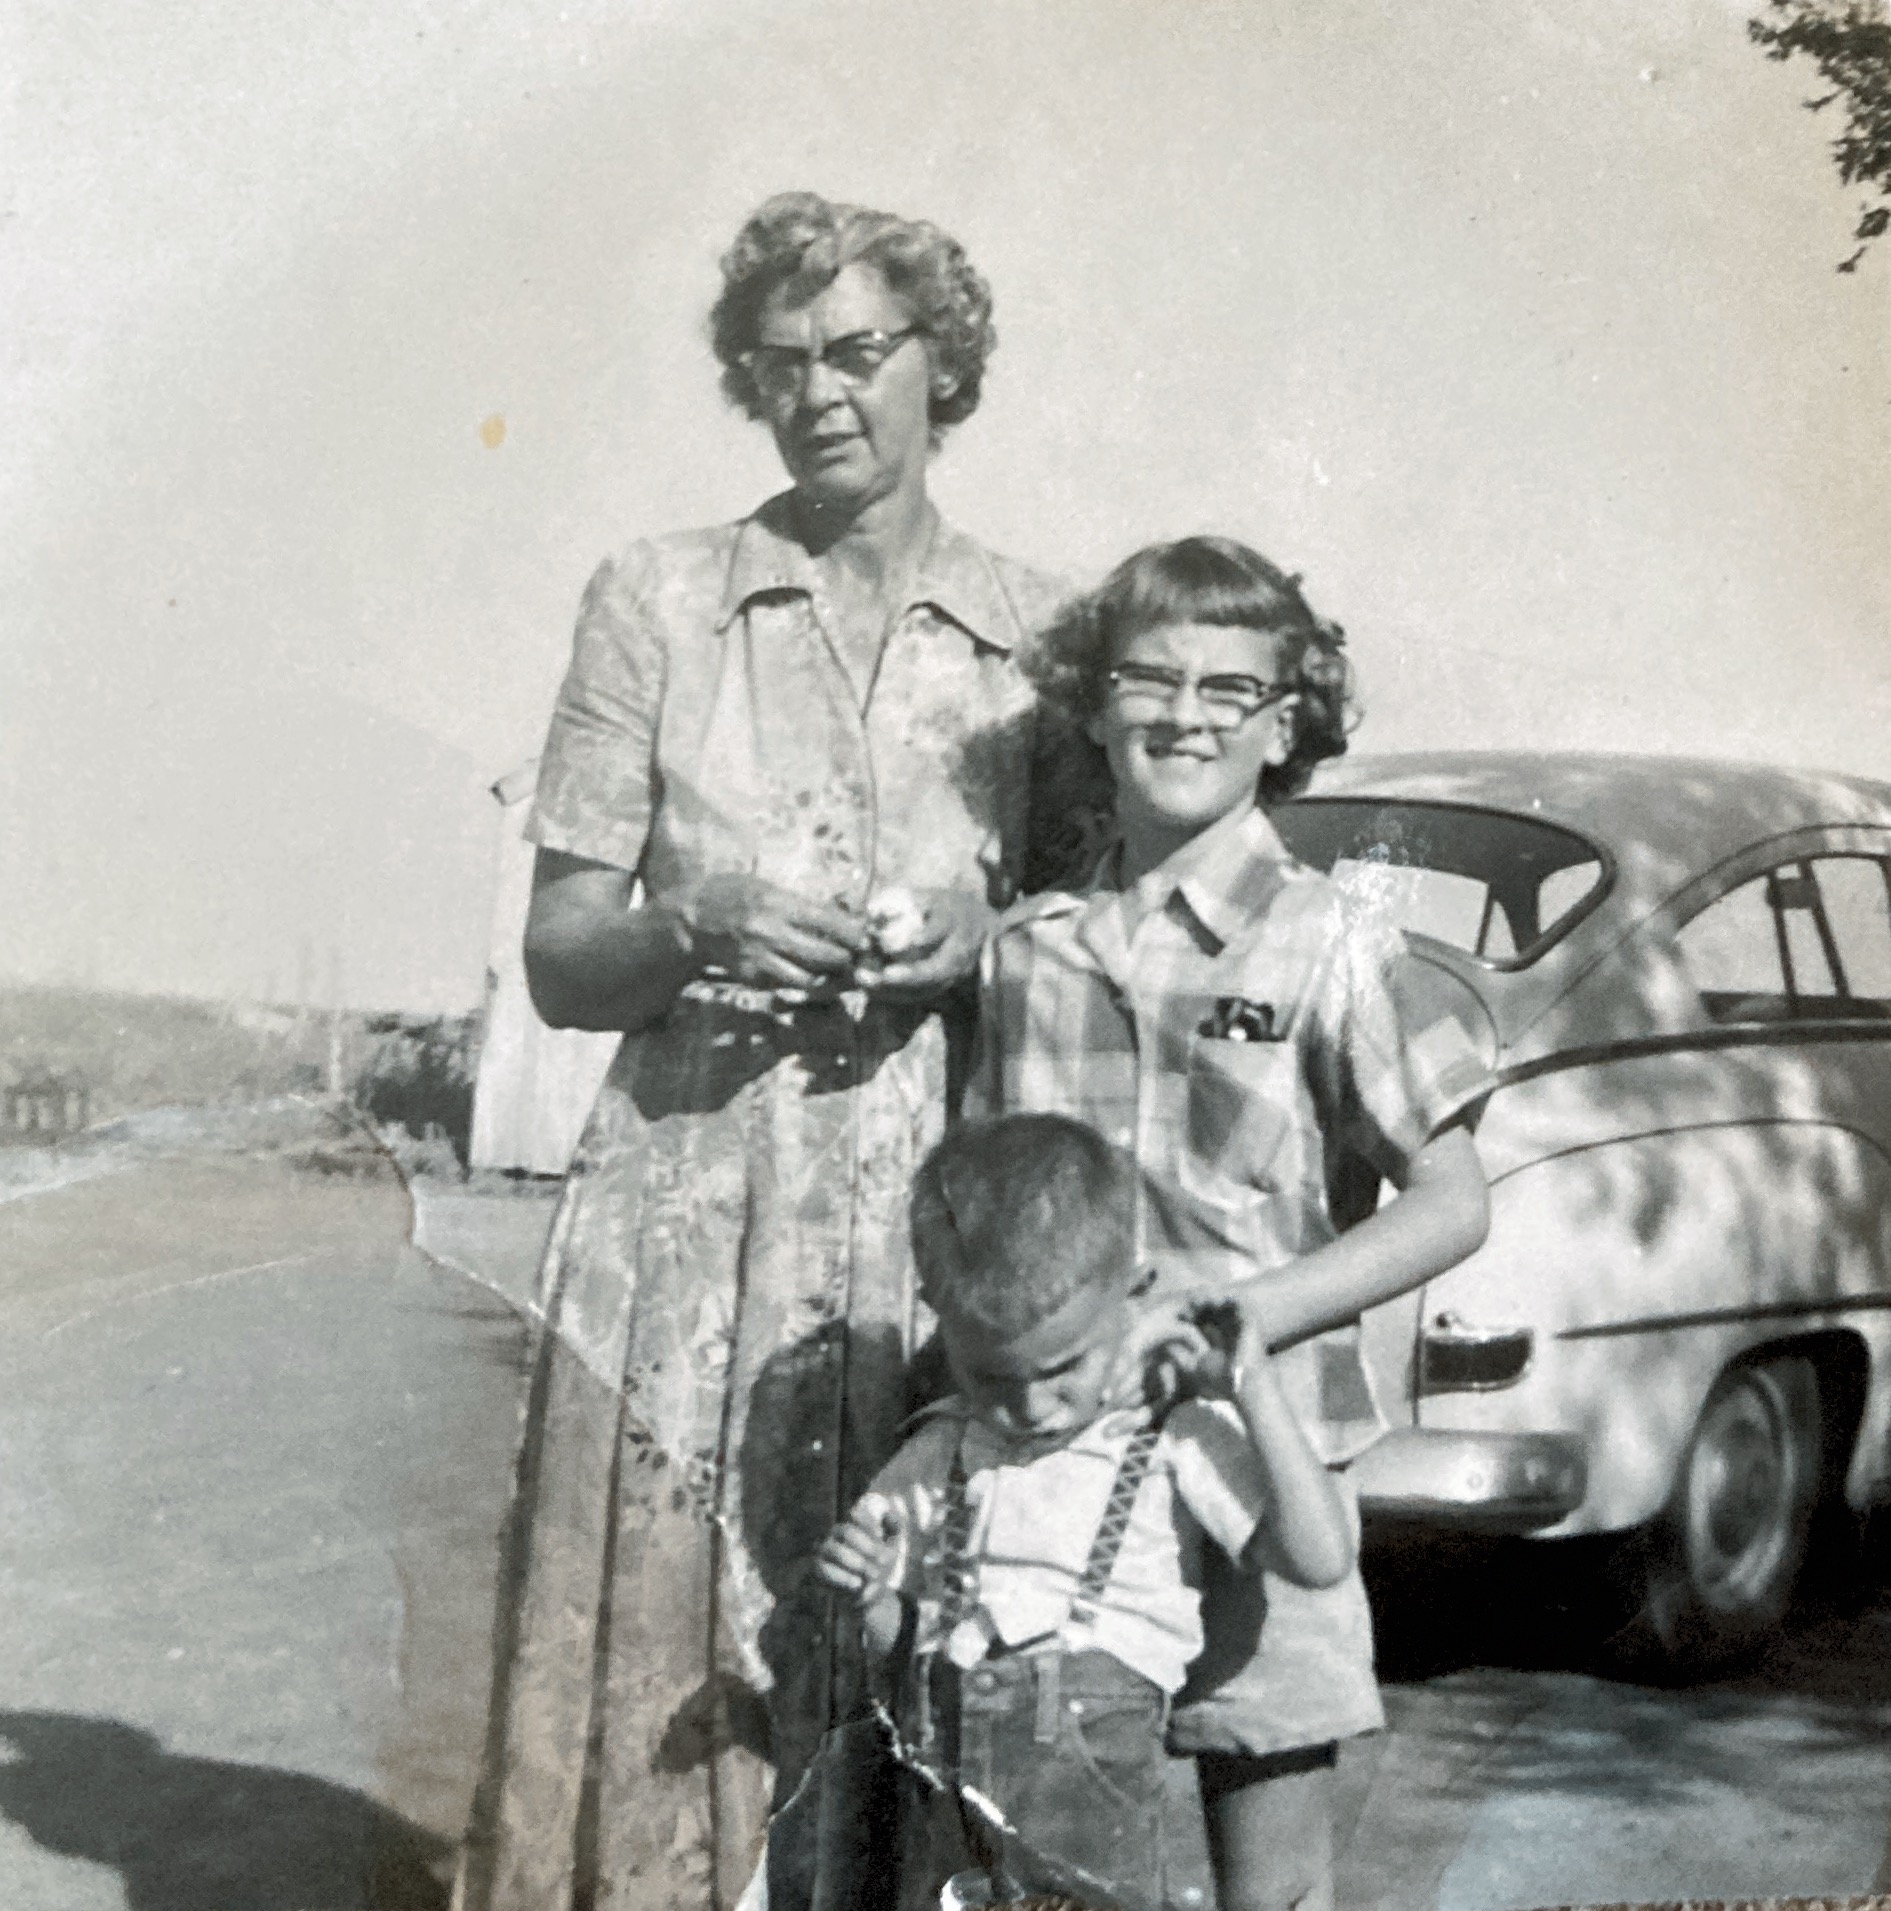 My grandmother, Bessie Francis Wilson Bryan, me (Michal) and my brother Glenn at their Tulia farm about 1954